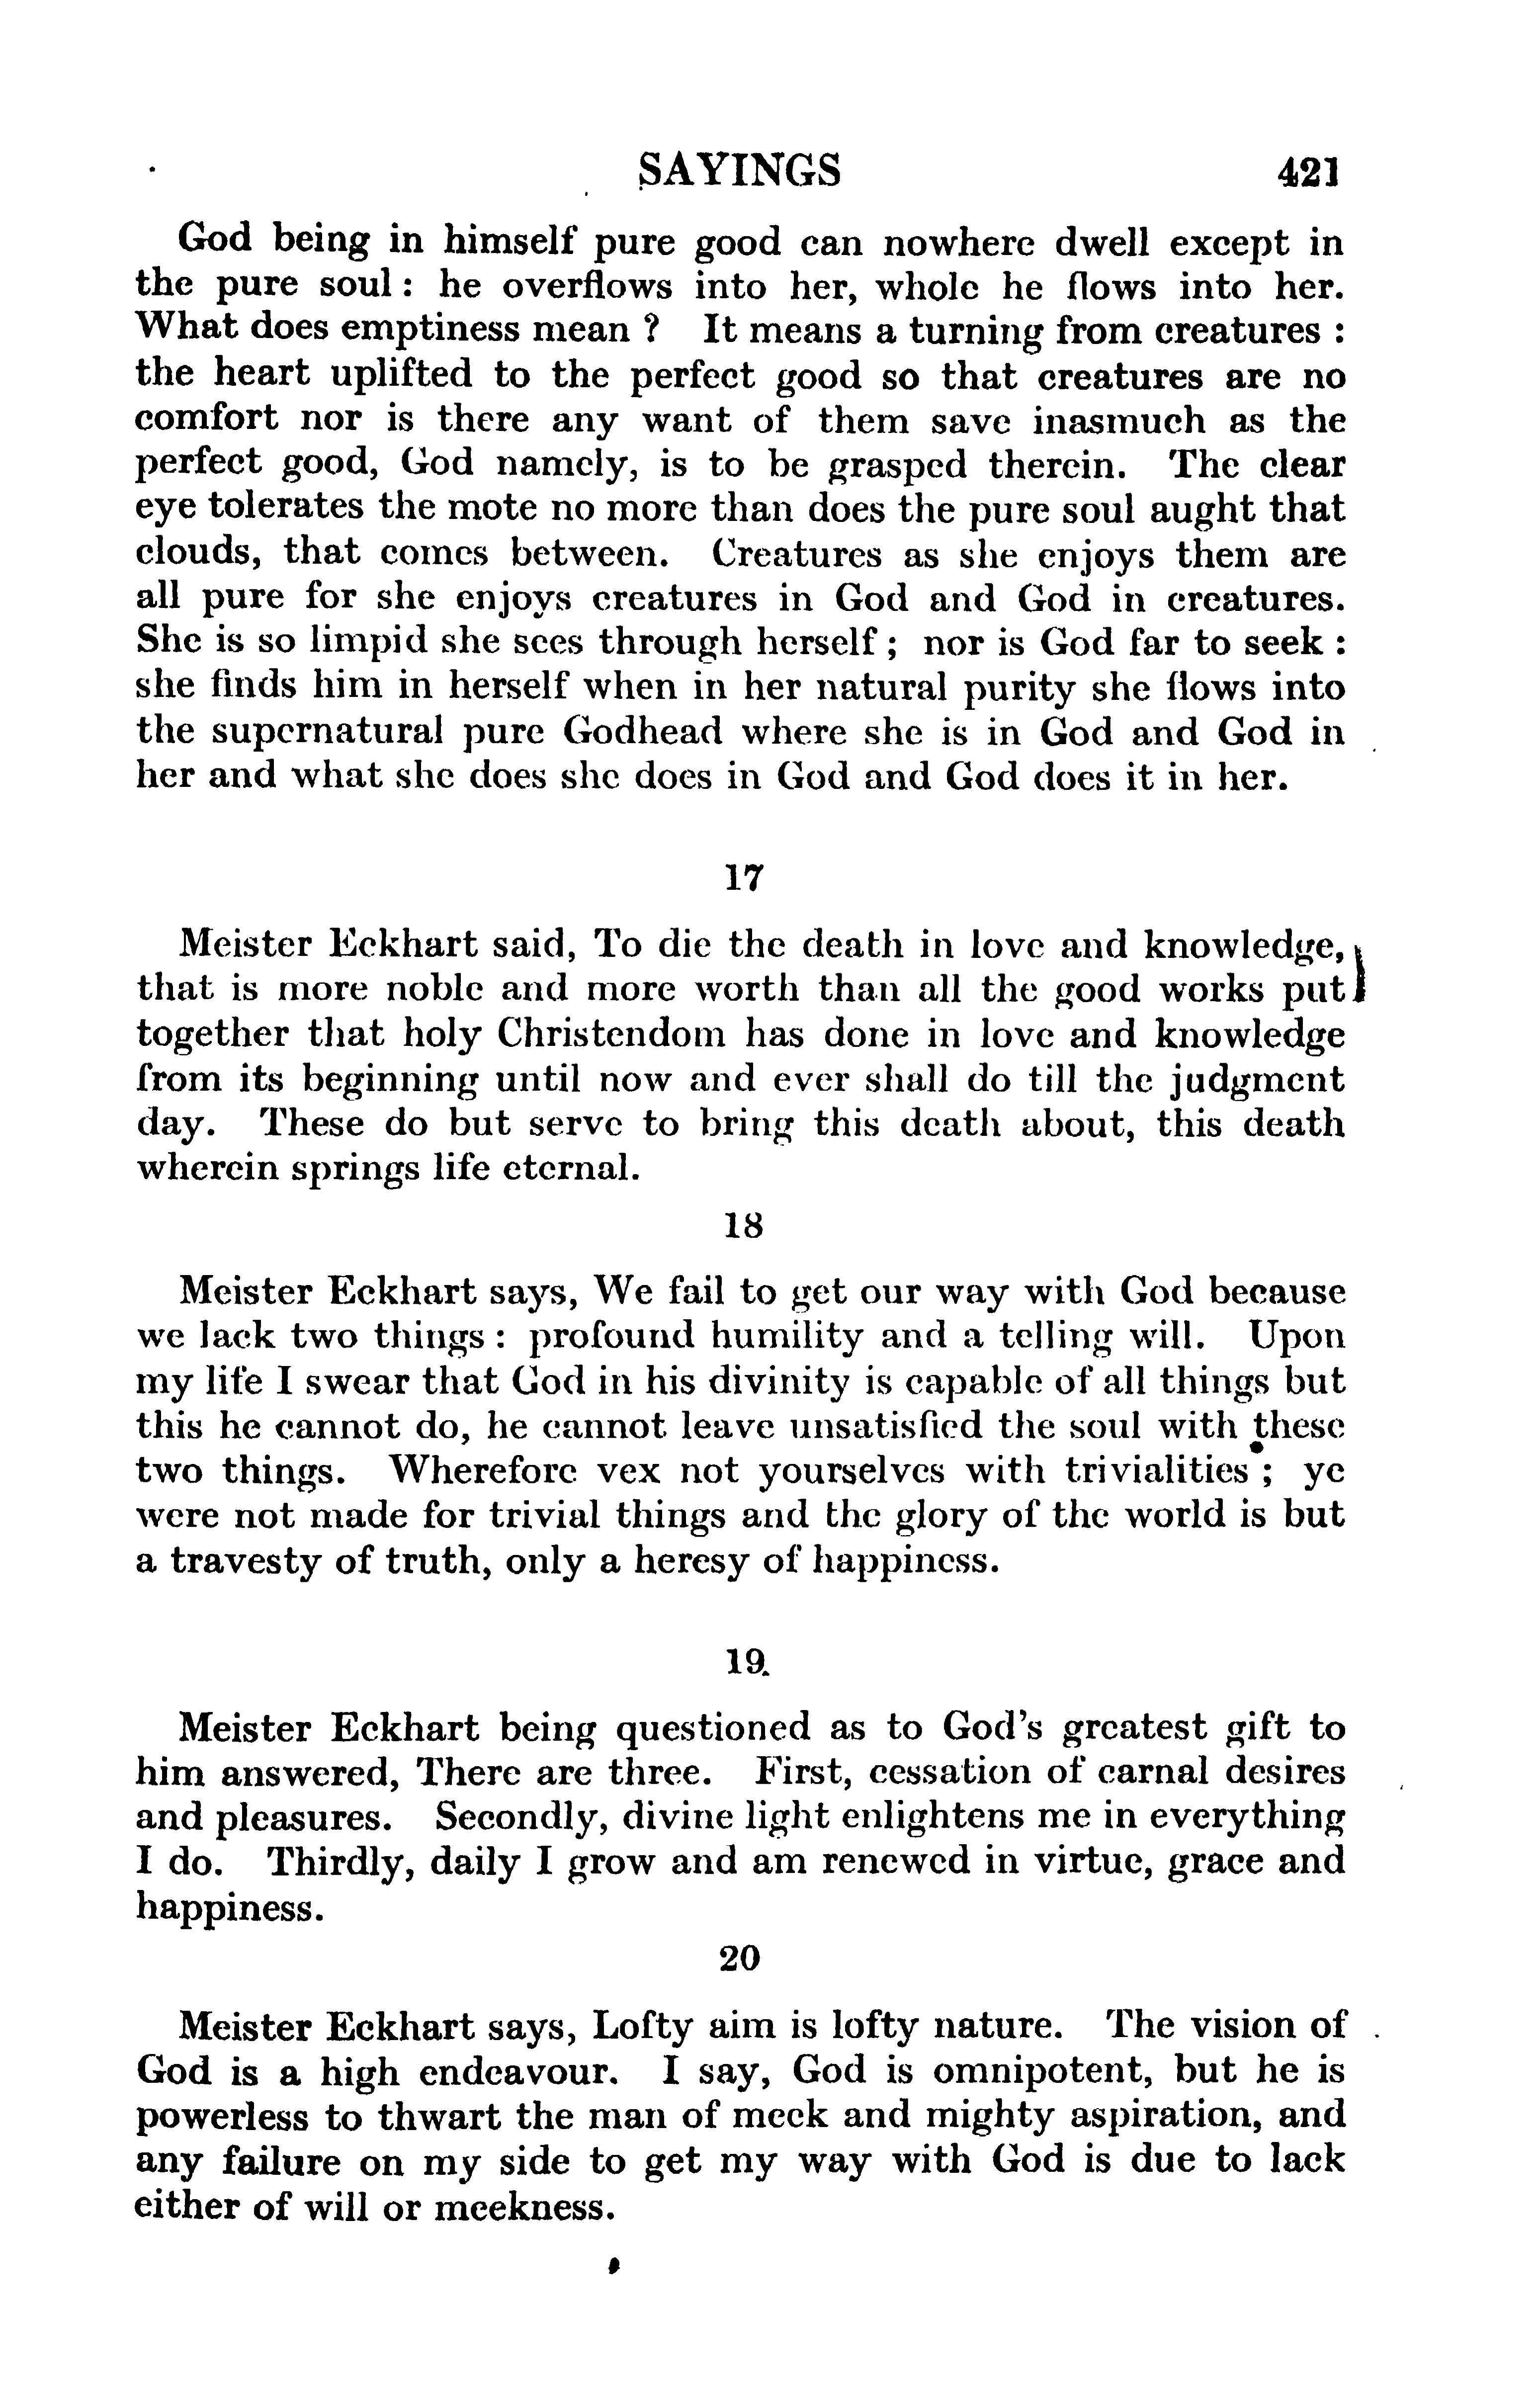 Image of page 0445